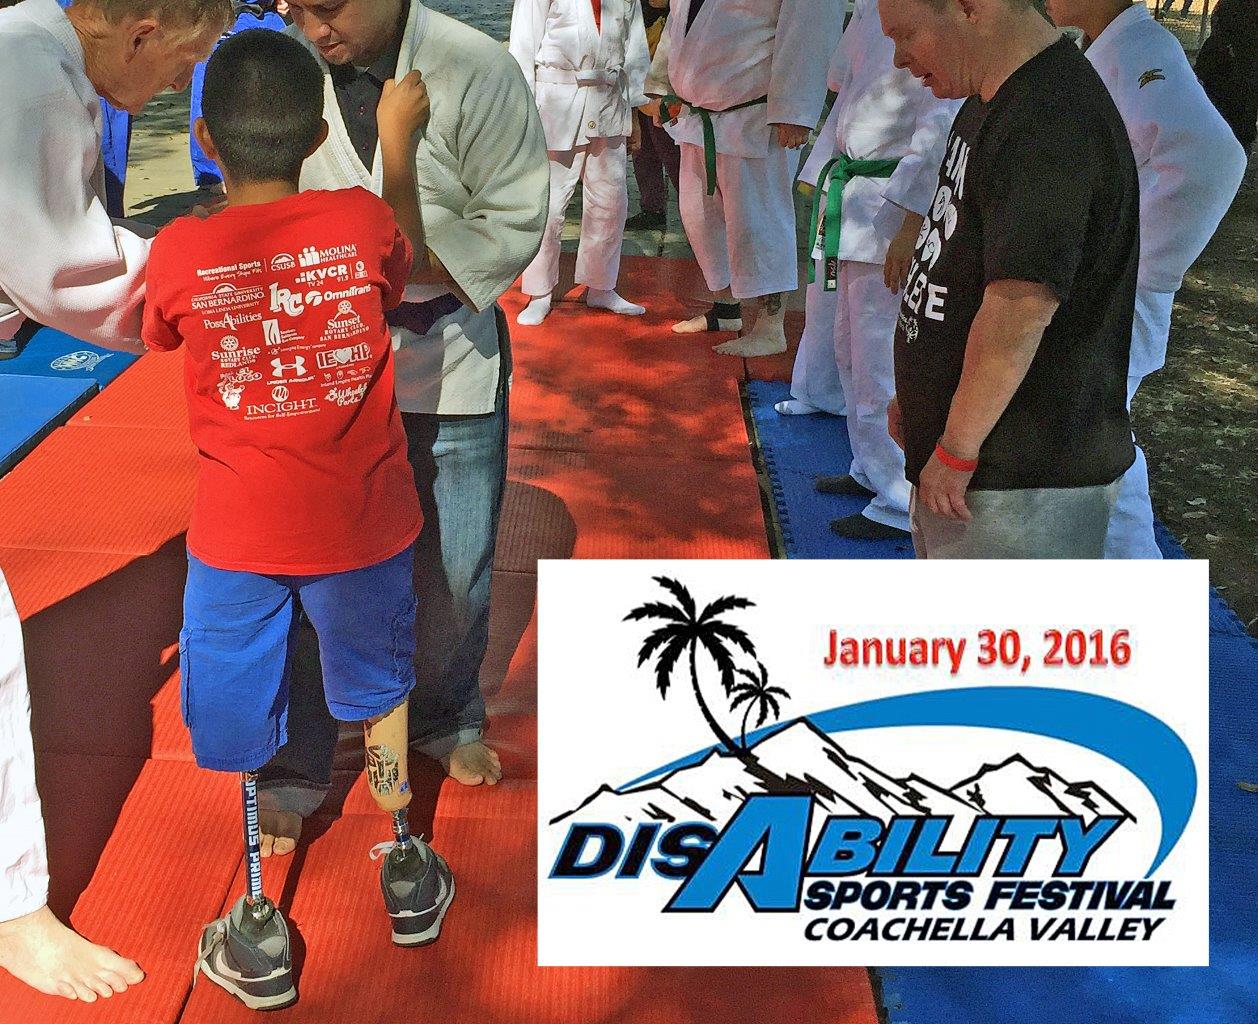 Champions in the making at CA State University at San Bernardino's (CSUSB) DisAbility Sports Festival